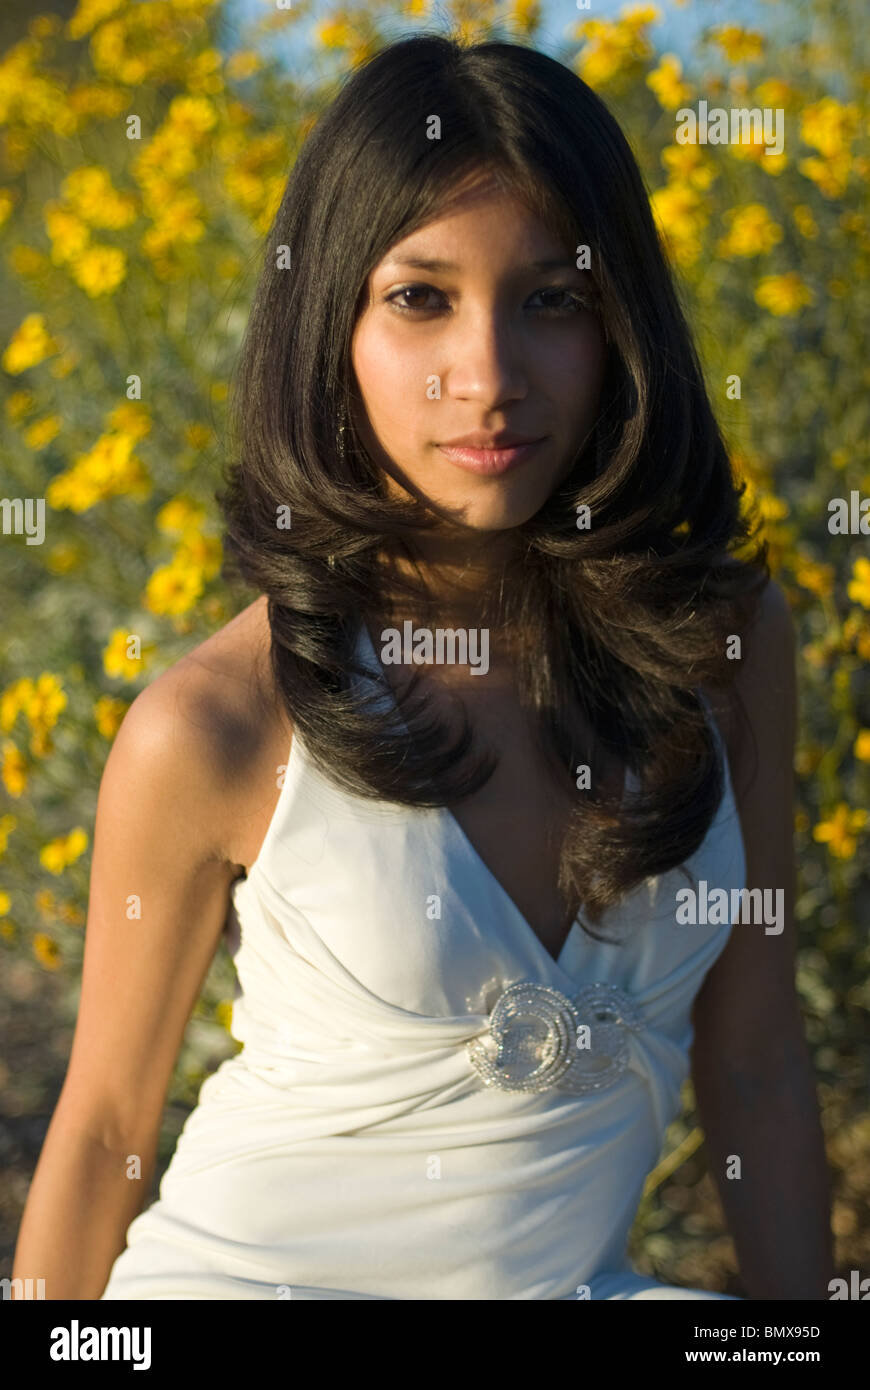 A young and very pretty mixed race woman is wearing a white formal dress with a patch of yellow flowers in the background. Stock Photo